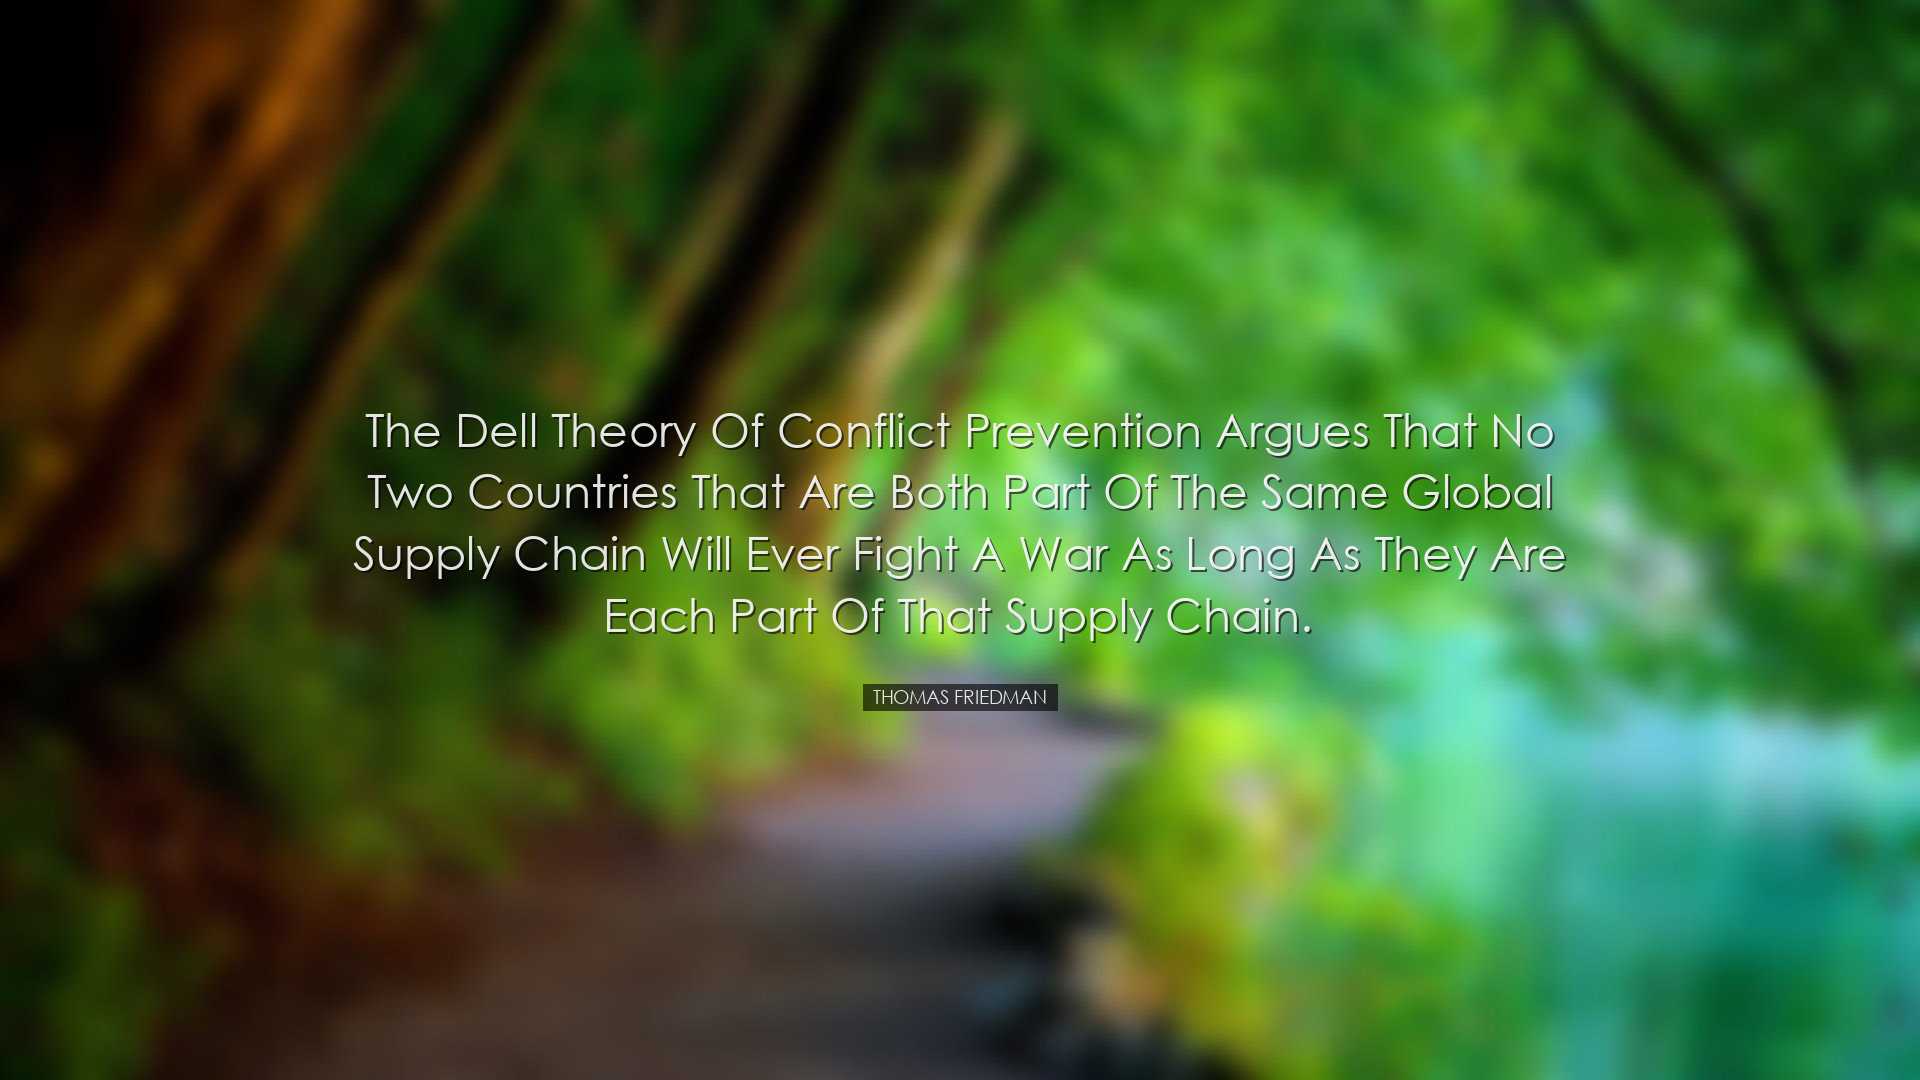 The Dell Theory of Conflict Prevention argues that no two countrie